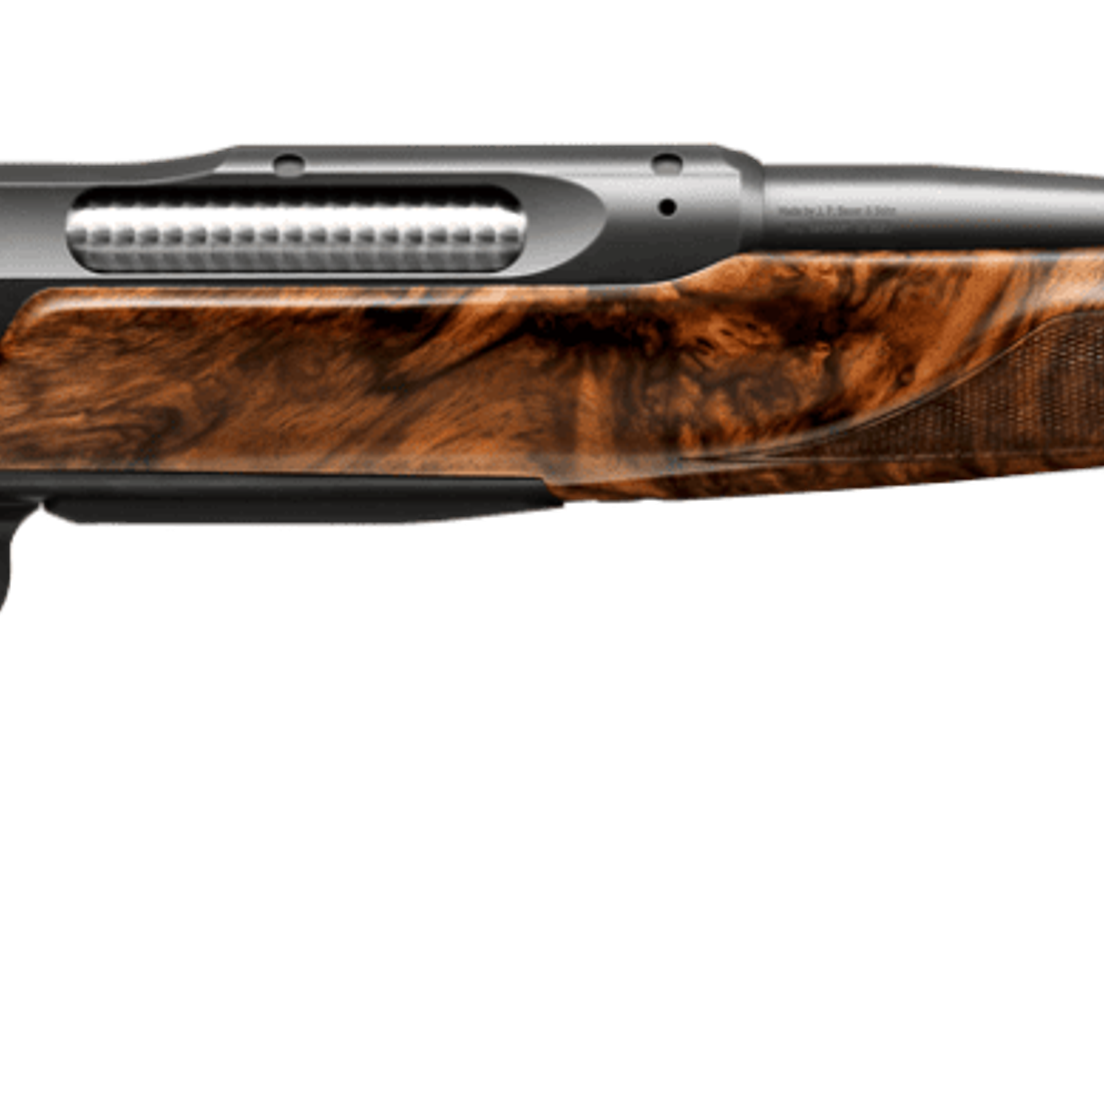 Sauer 505 - The culmination of a history